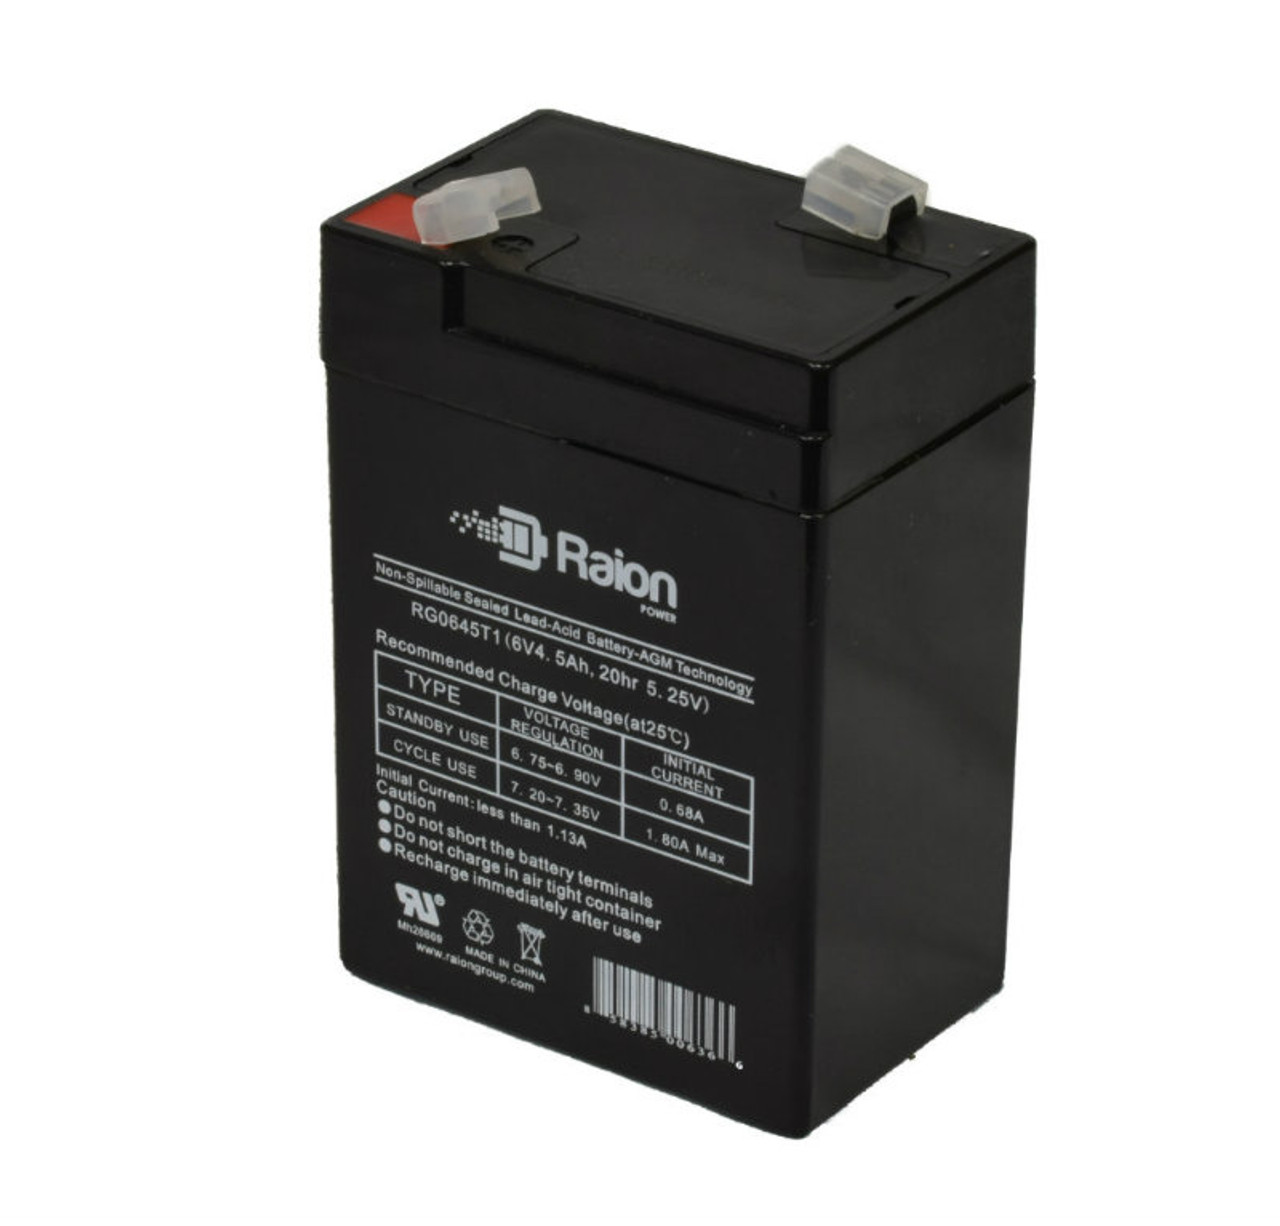 Raion Power RG0645T1 6V 4.5Ah Replacement Battery Cartridge for Light Alarms E8W